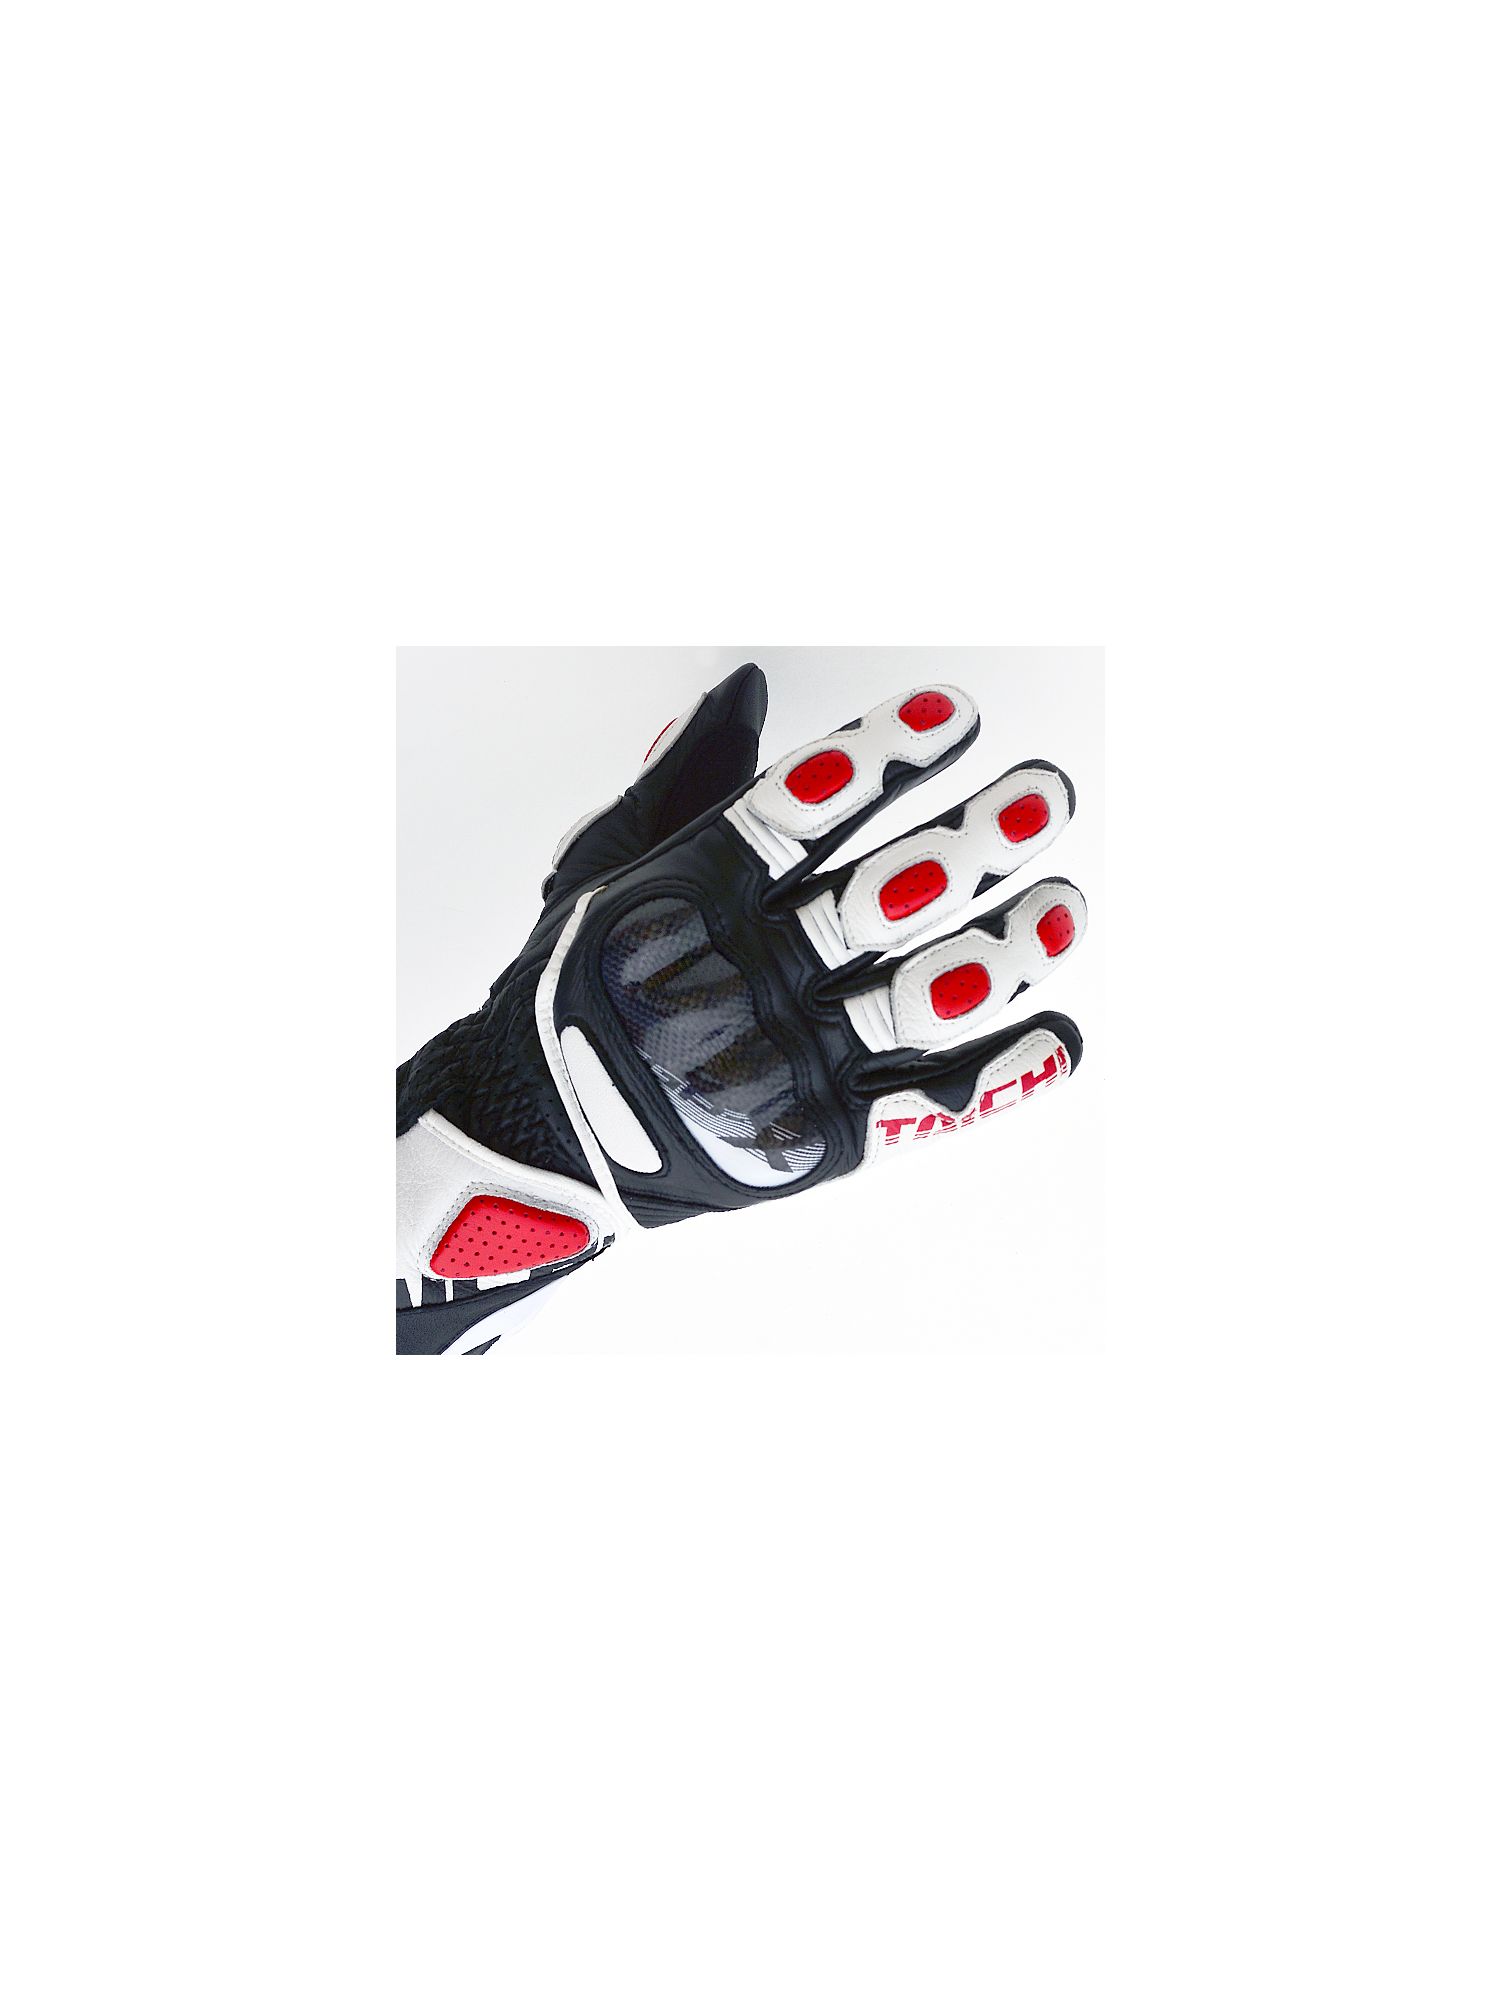 NXT053 | GP-X RACING GLOVES［4colors］